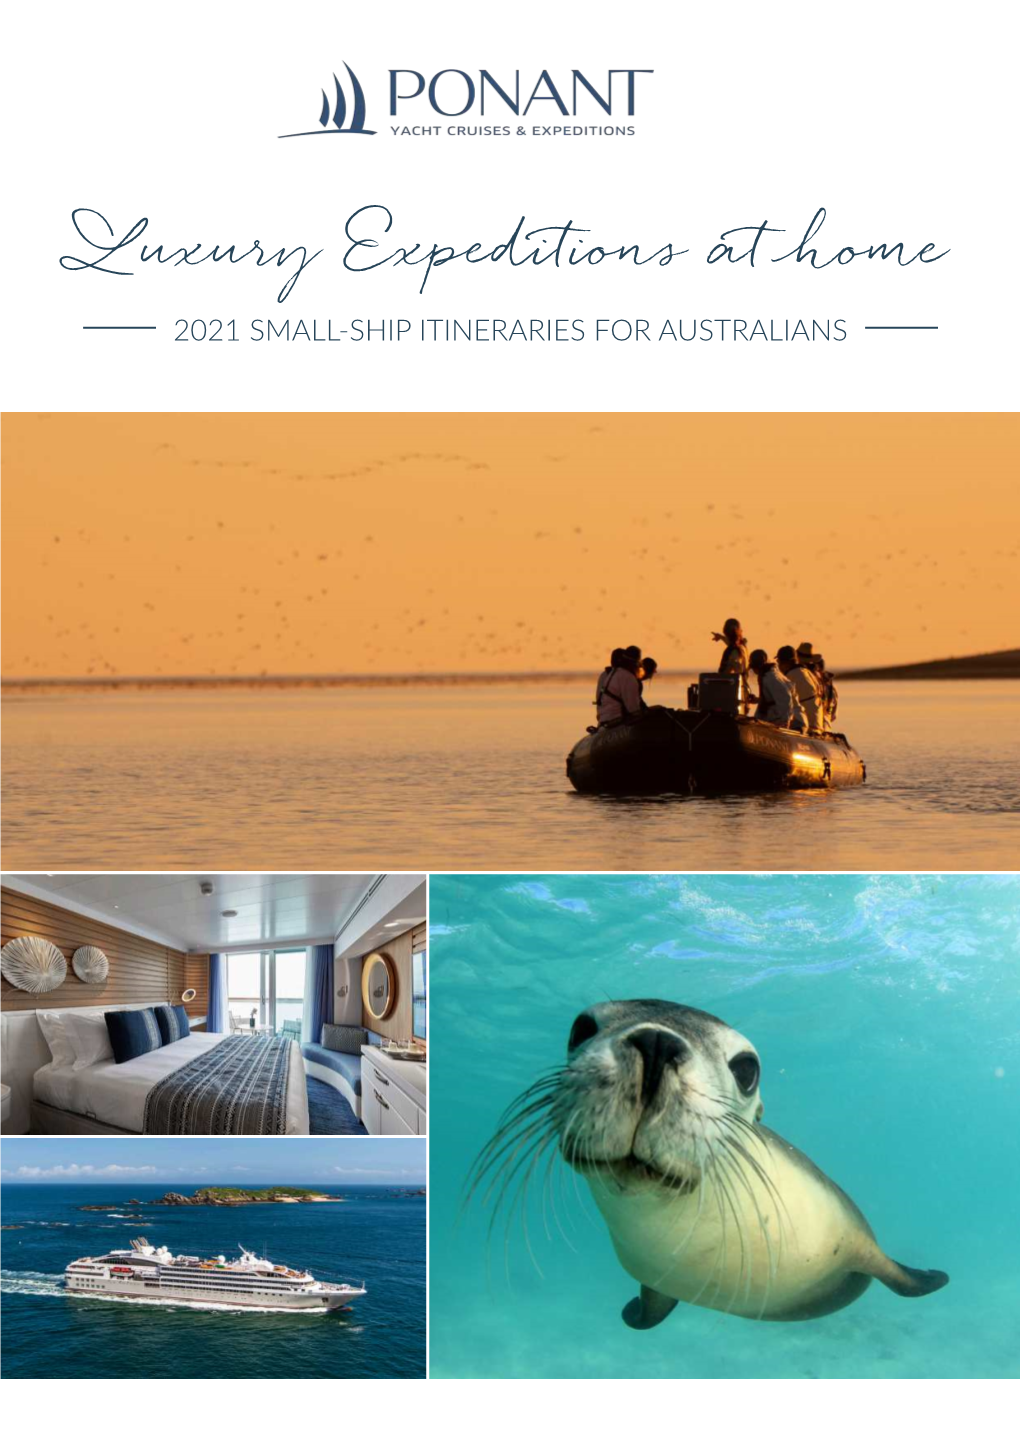 Luxury Expeditions at Home 2021 SMALL-SHIP ITINERARIES for AUSTRALIANS